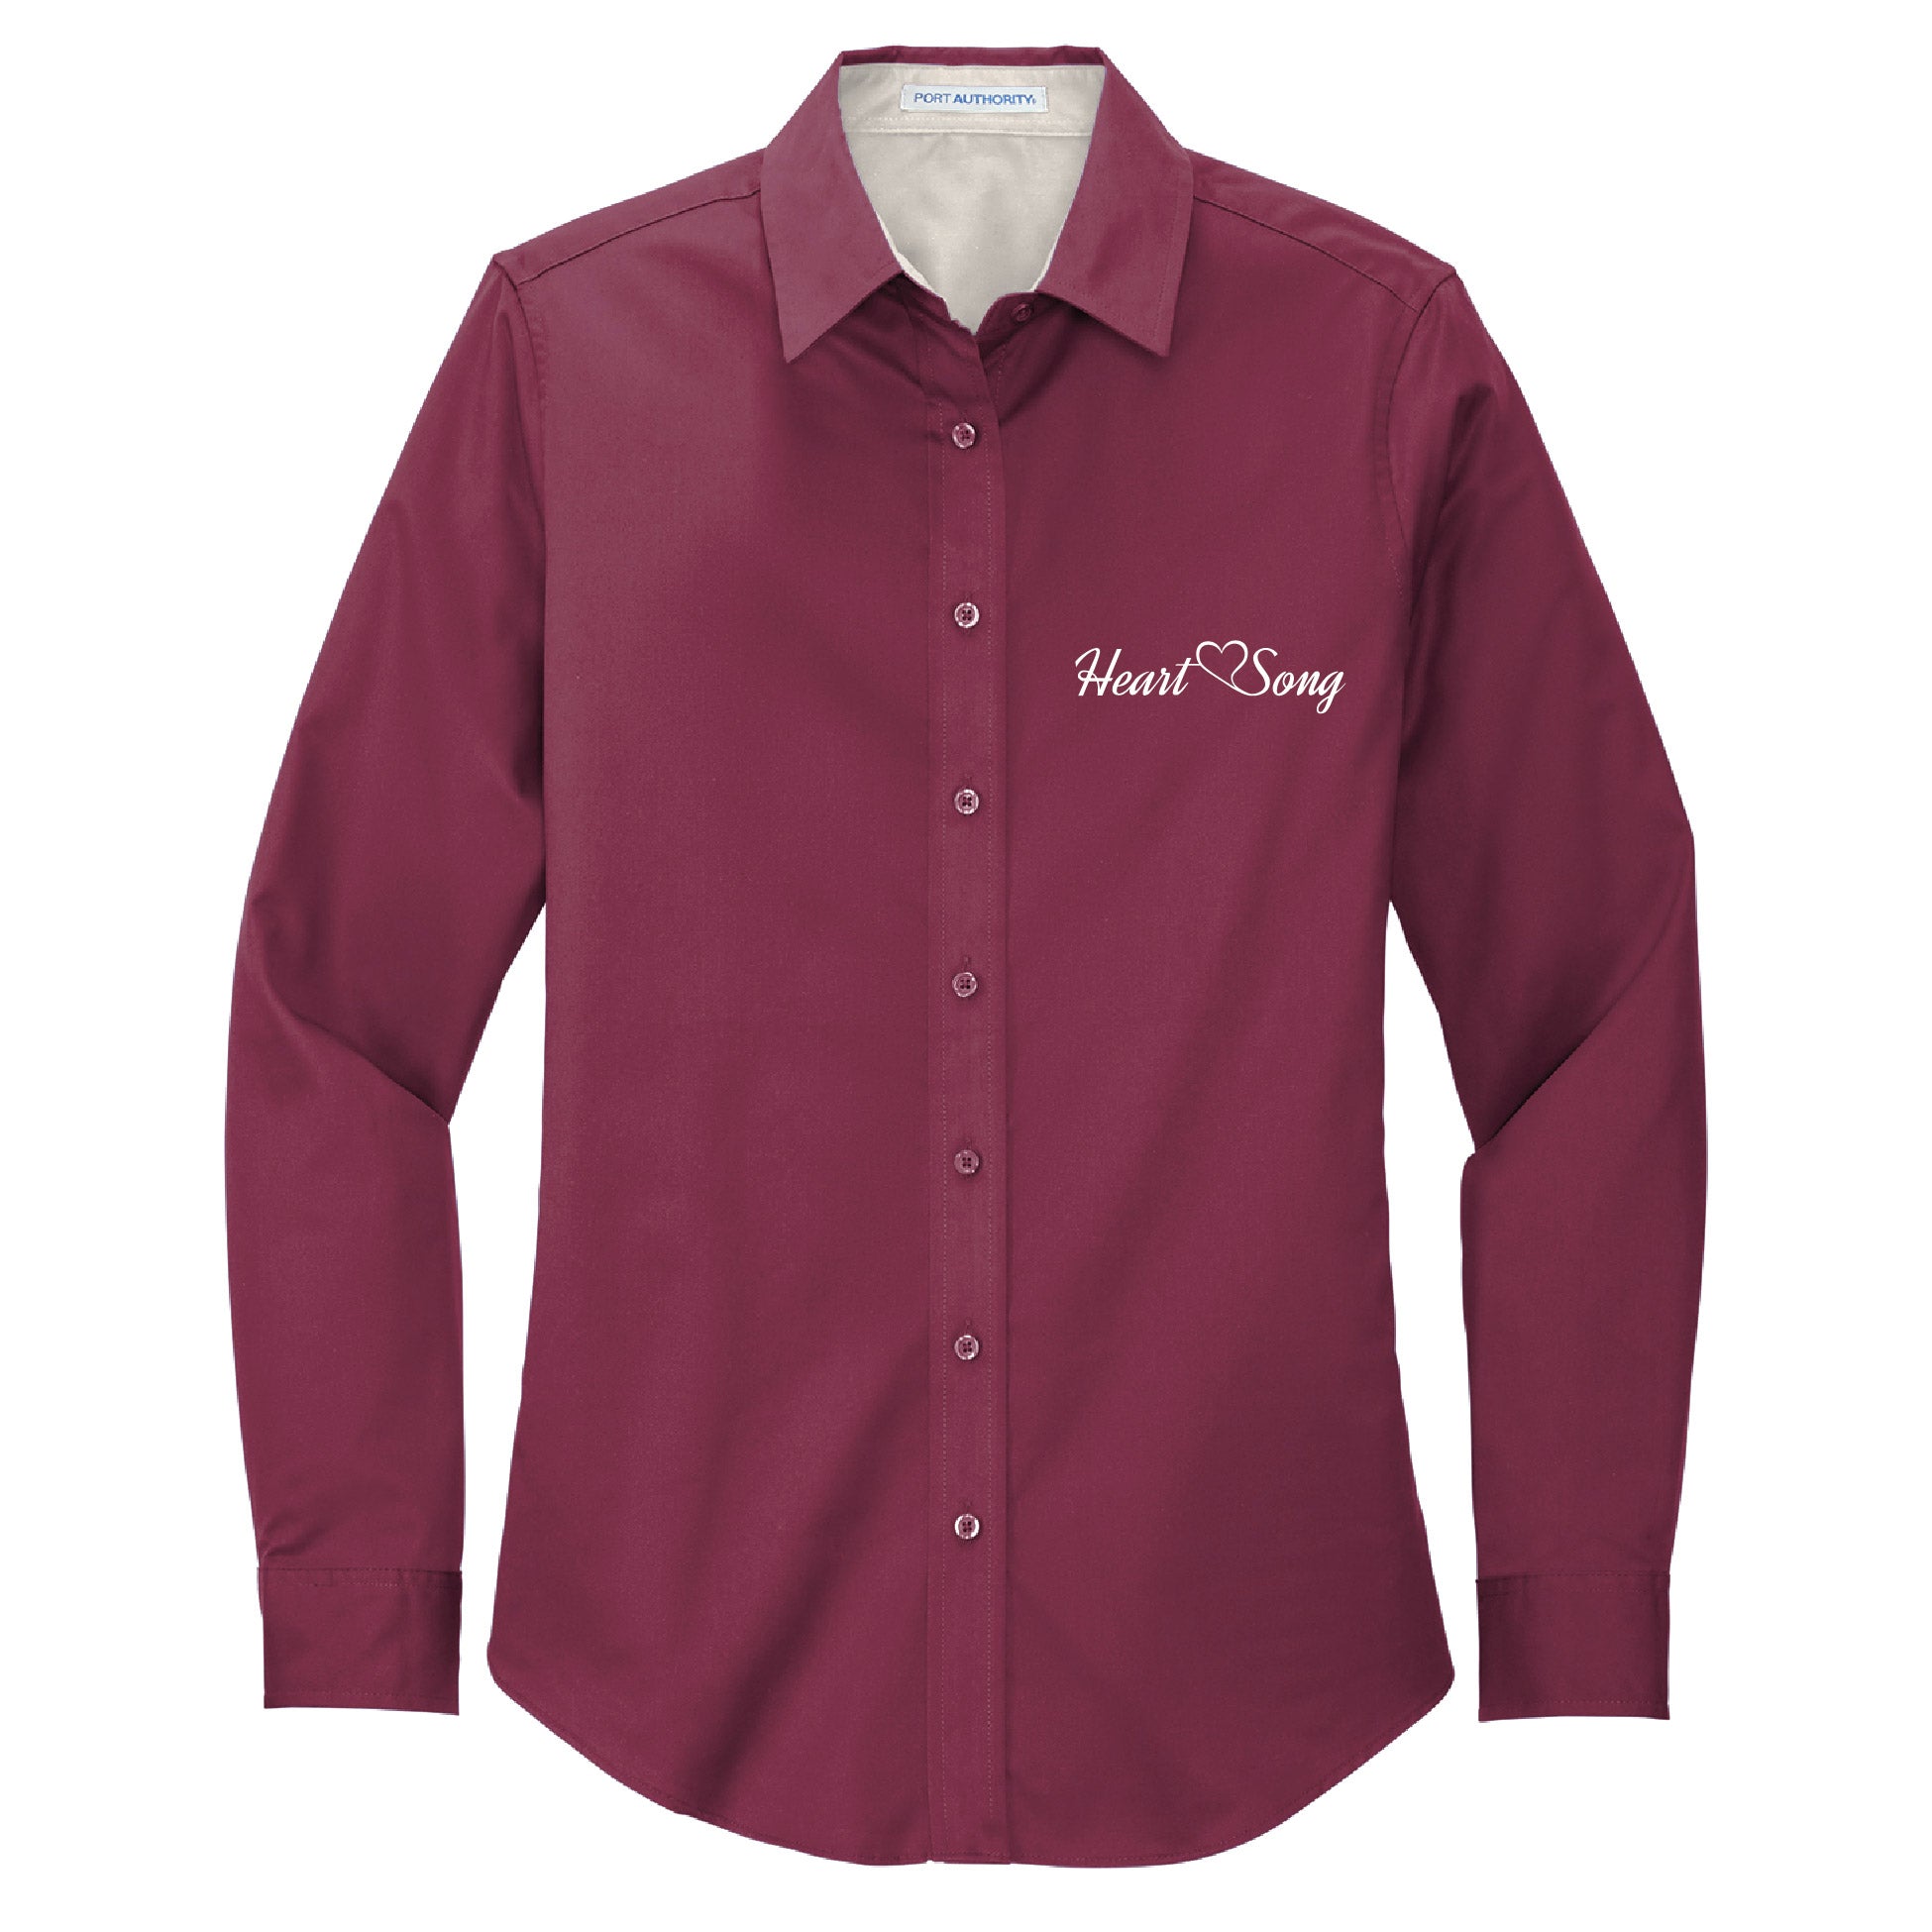 Heart Song Ladies Long Sleeve Button-Up Shirt